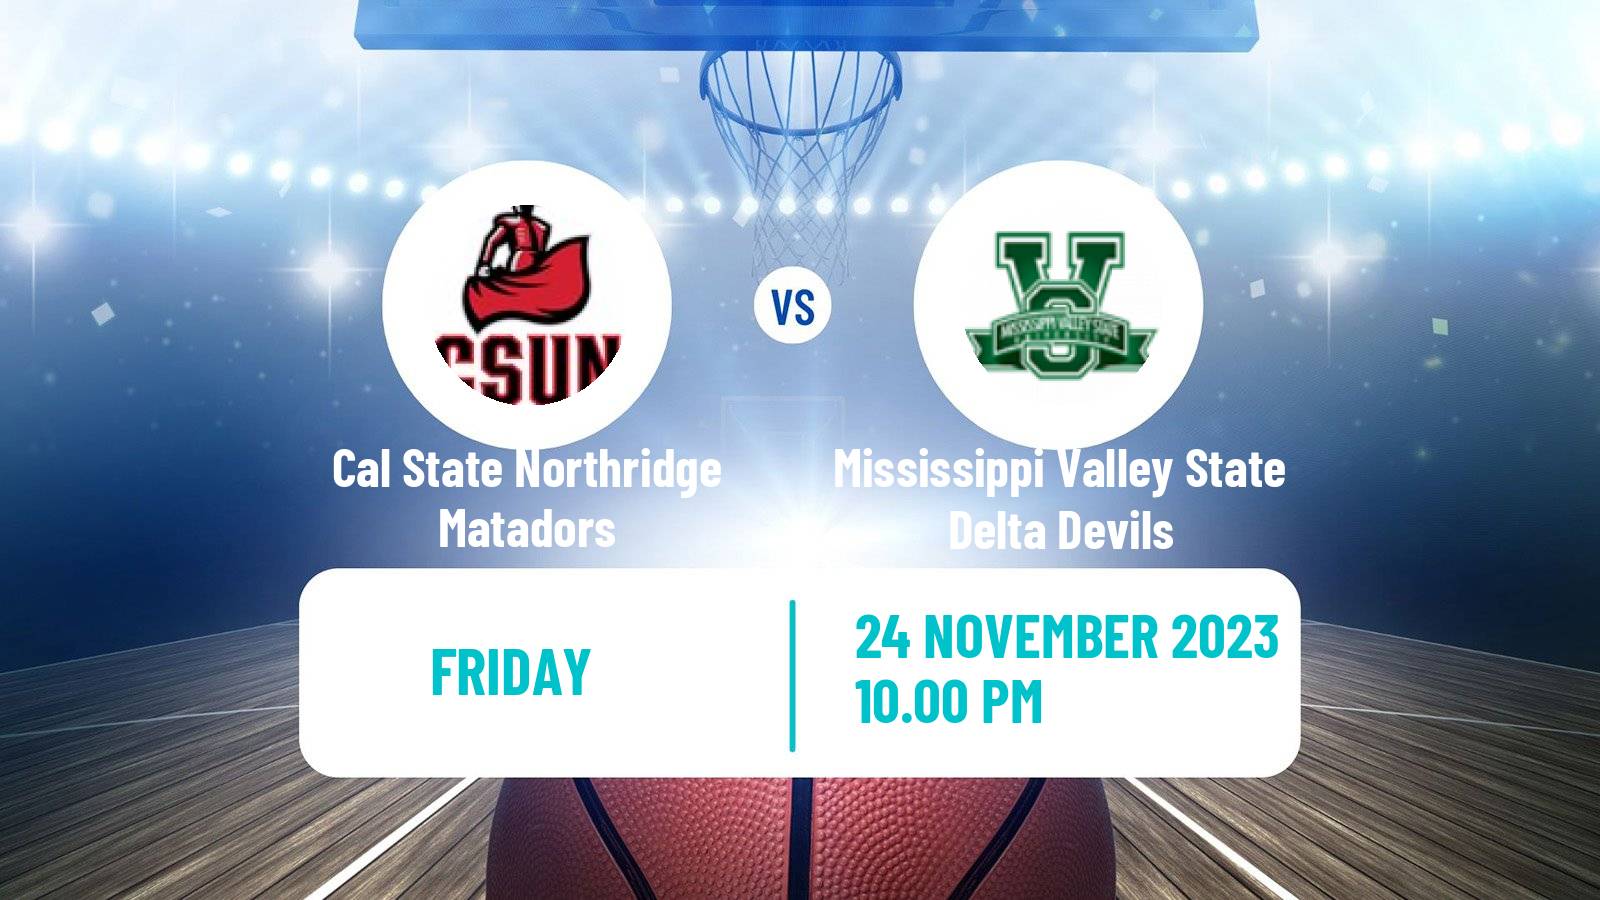 Basketball NCAA College Basketball Cal State Northridge Matadors - Mississippi Valley State Delta Devils